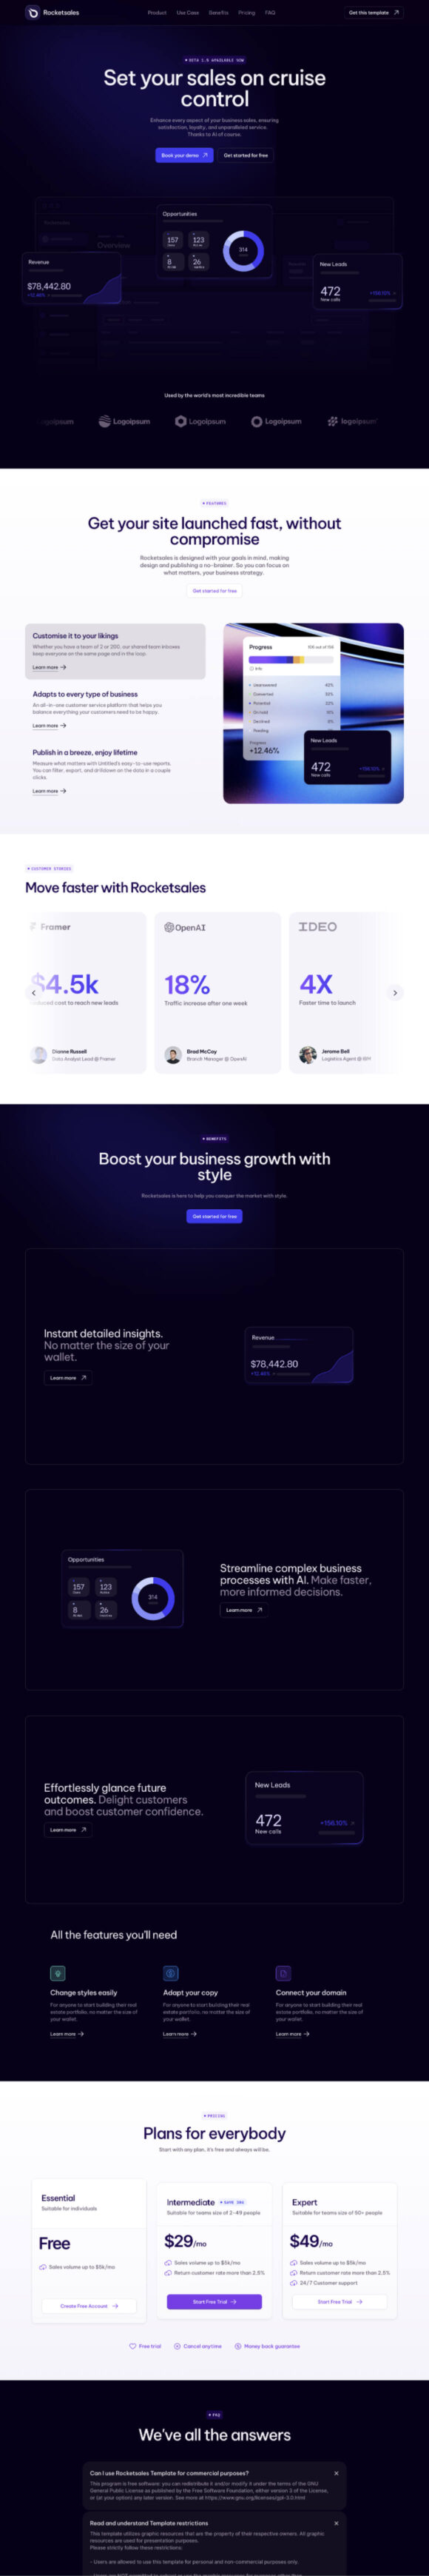 Full preview of the landing page